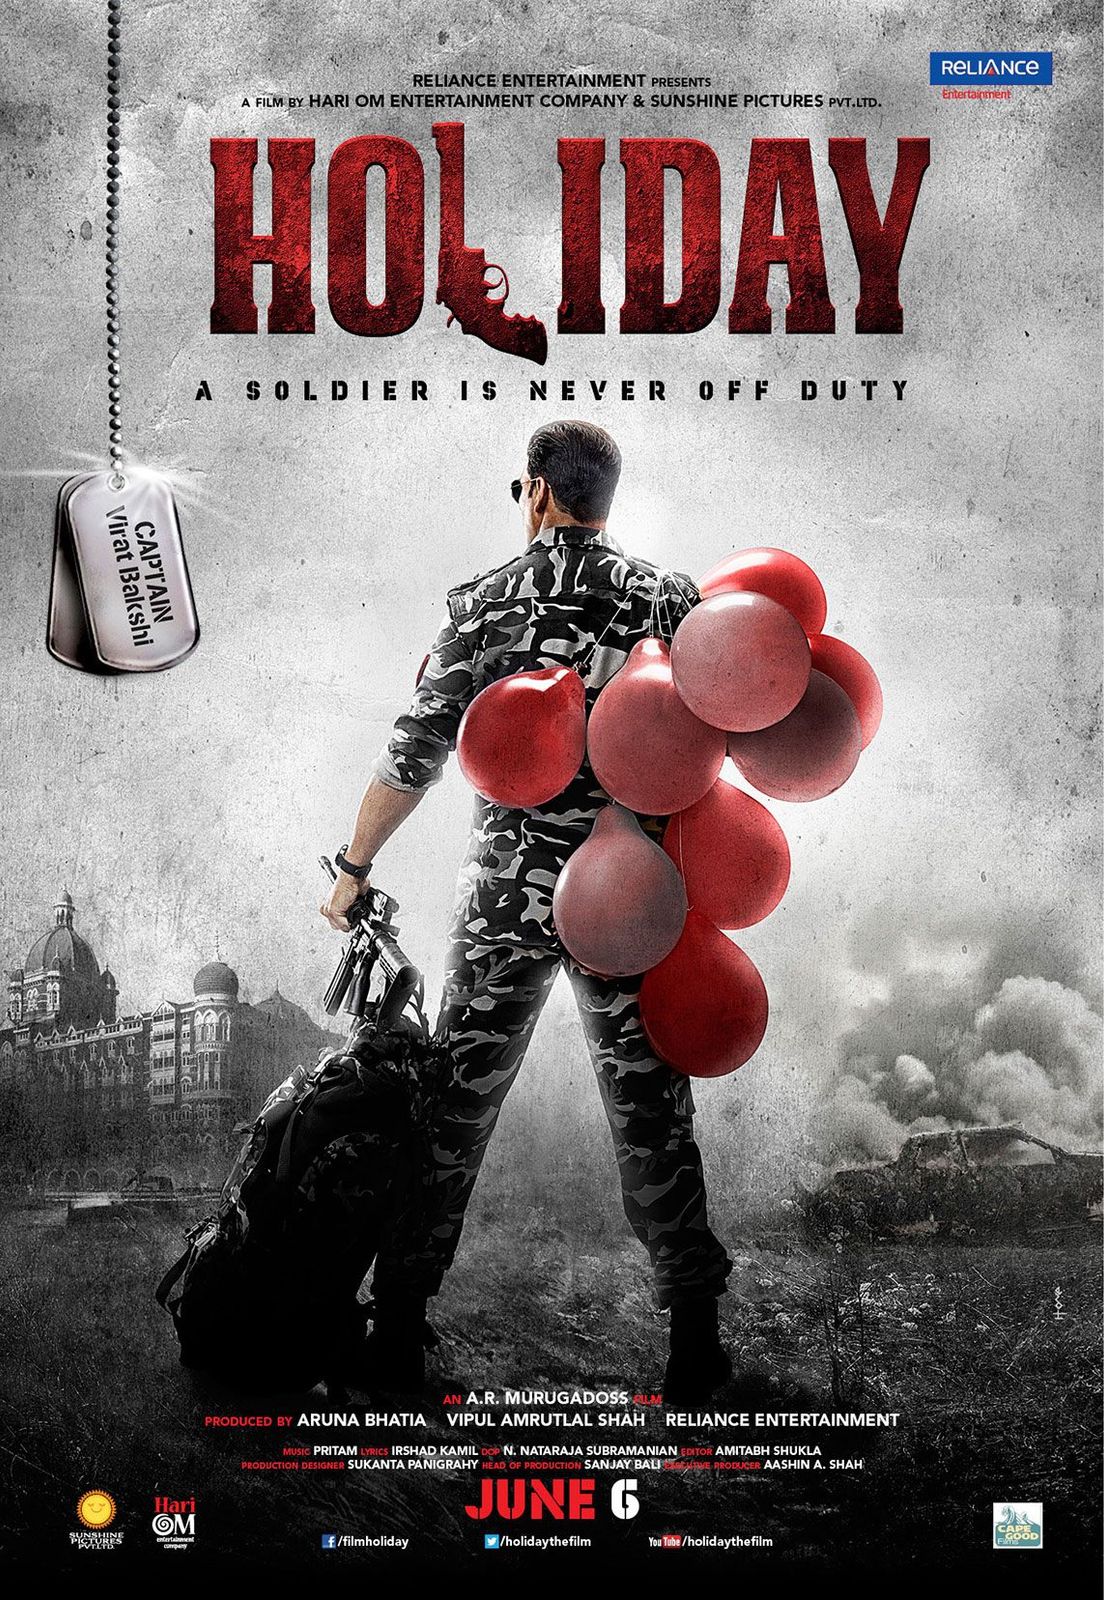 Akshay Kumar provides preview of behind the scene action sequences from Holiday